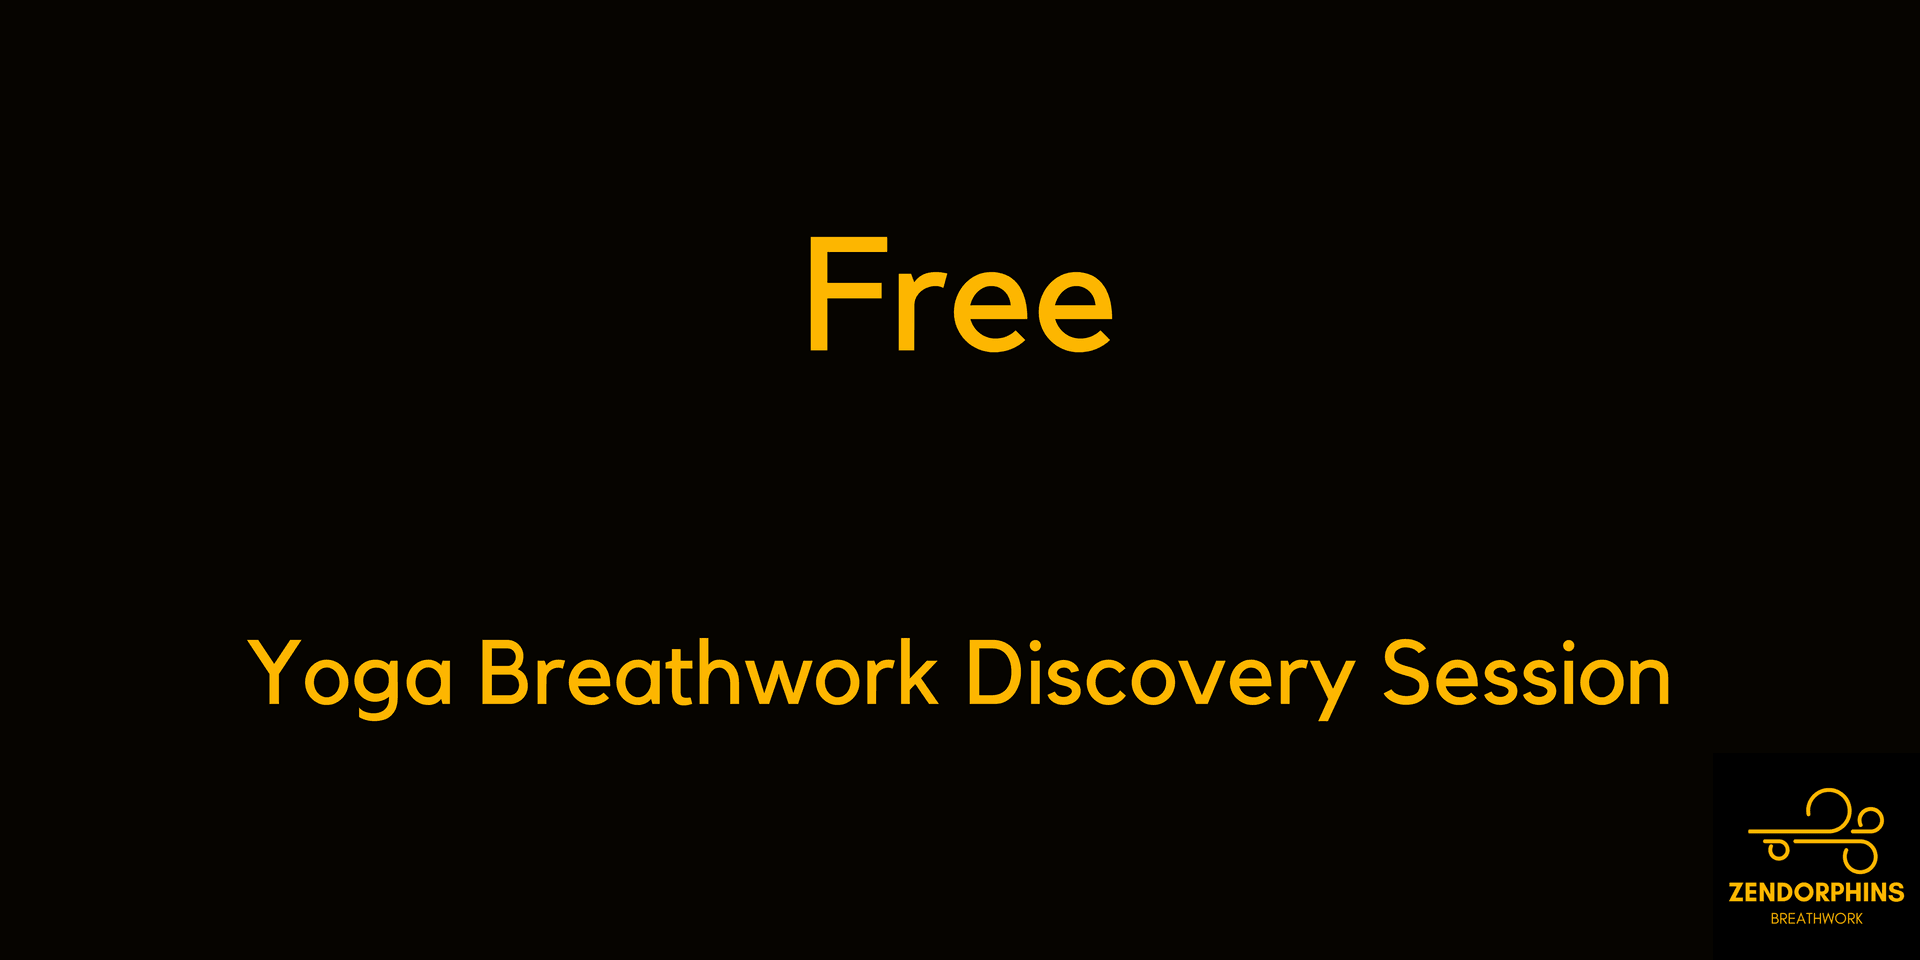 Free Yoga Breathwork Discovery Session